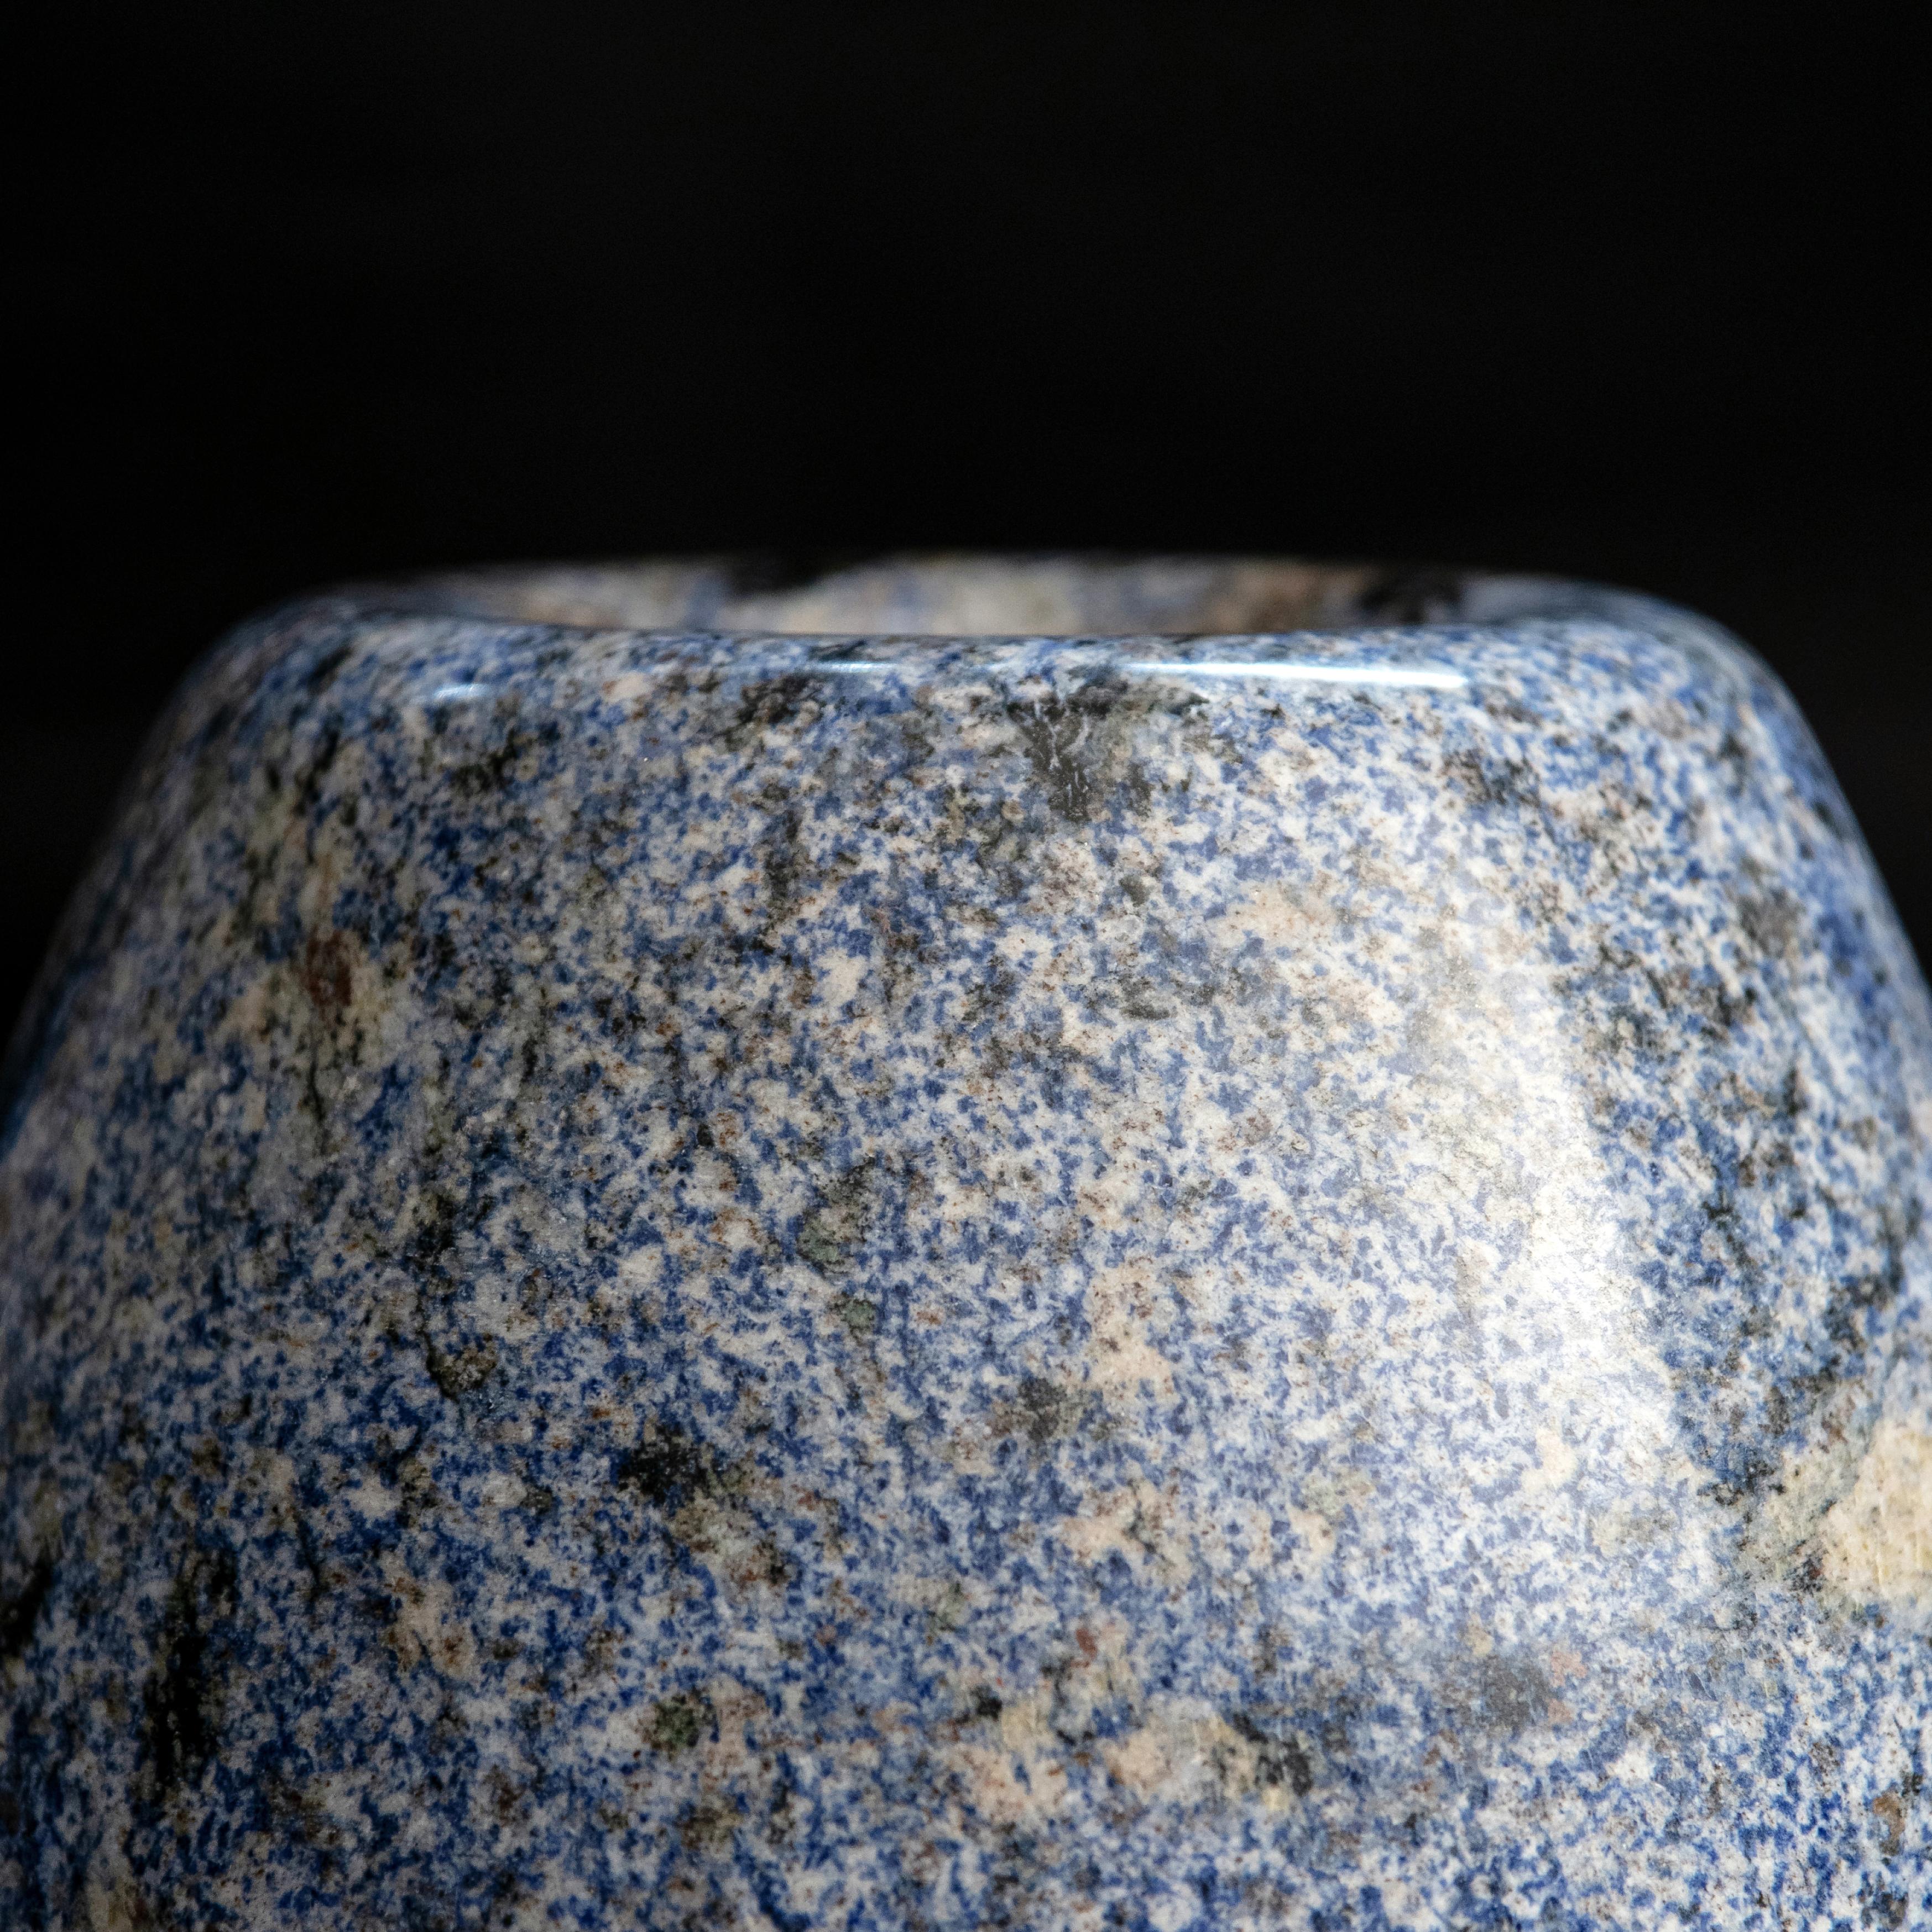 Designed by Franco Albini in 1940 and edited by Officina della Scala for the very first time from a sketch belonging to a project called “Furniture Perspective”; this vase in an unique piece made of a single block of precious marble - called Azul